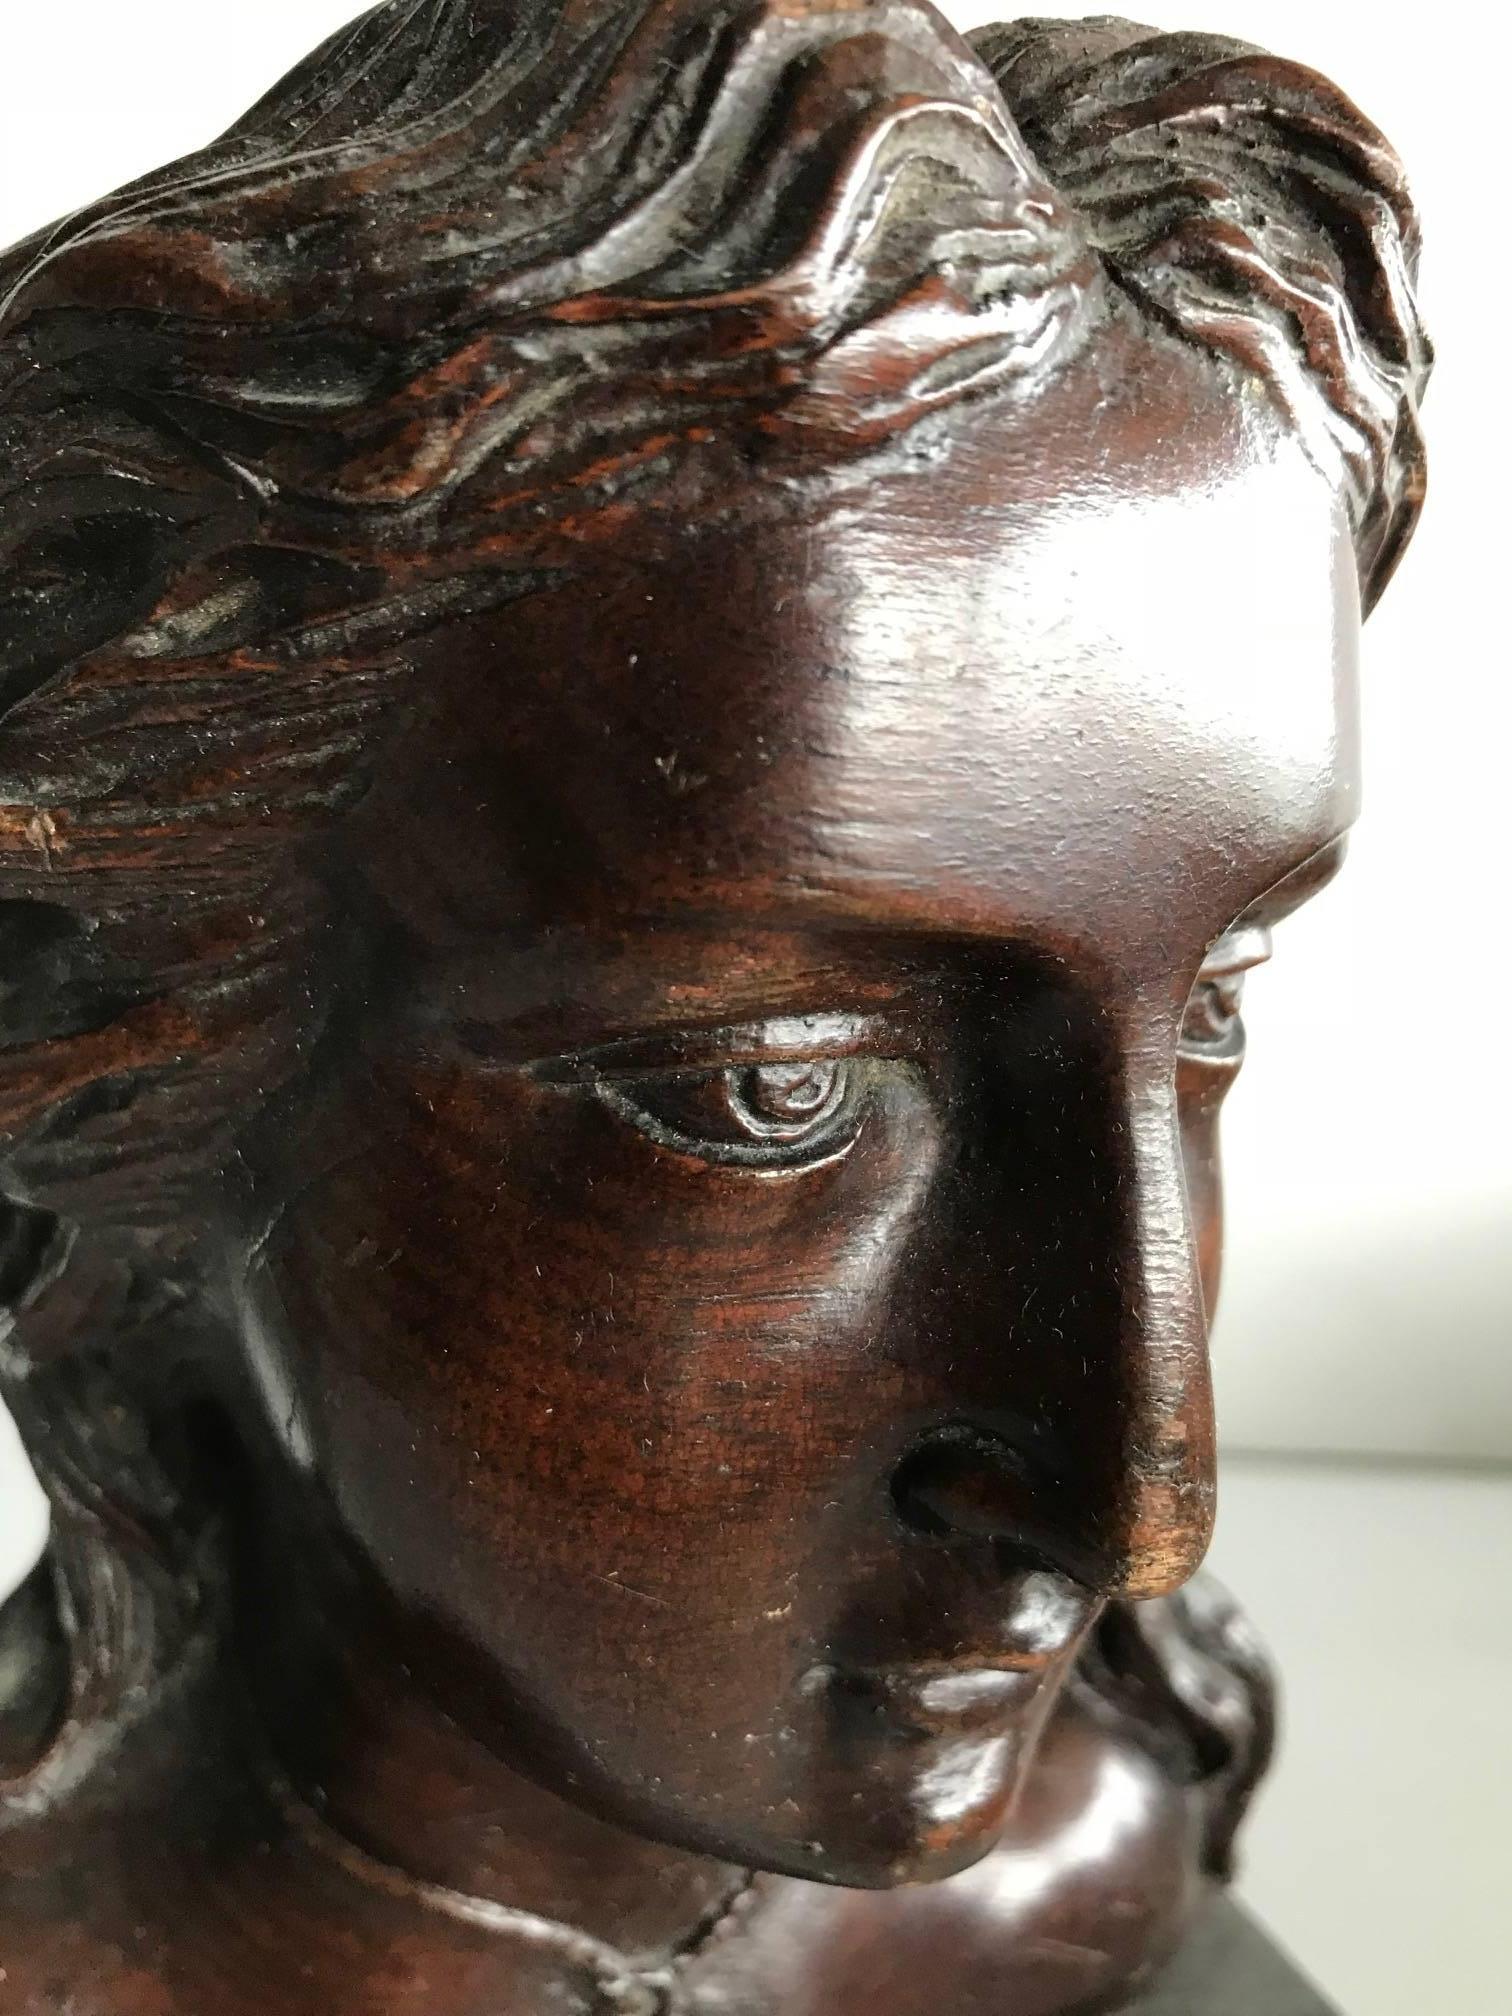 19th/20th Century Wood Carved Bust & Head - Brown Figurative Sculpture by Unknown